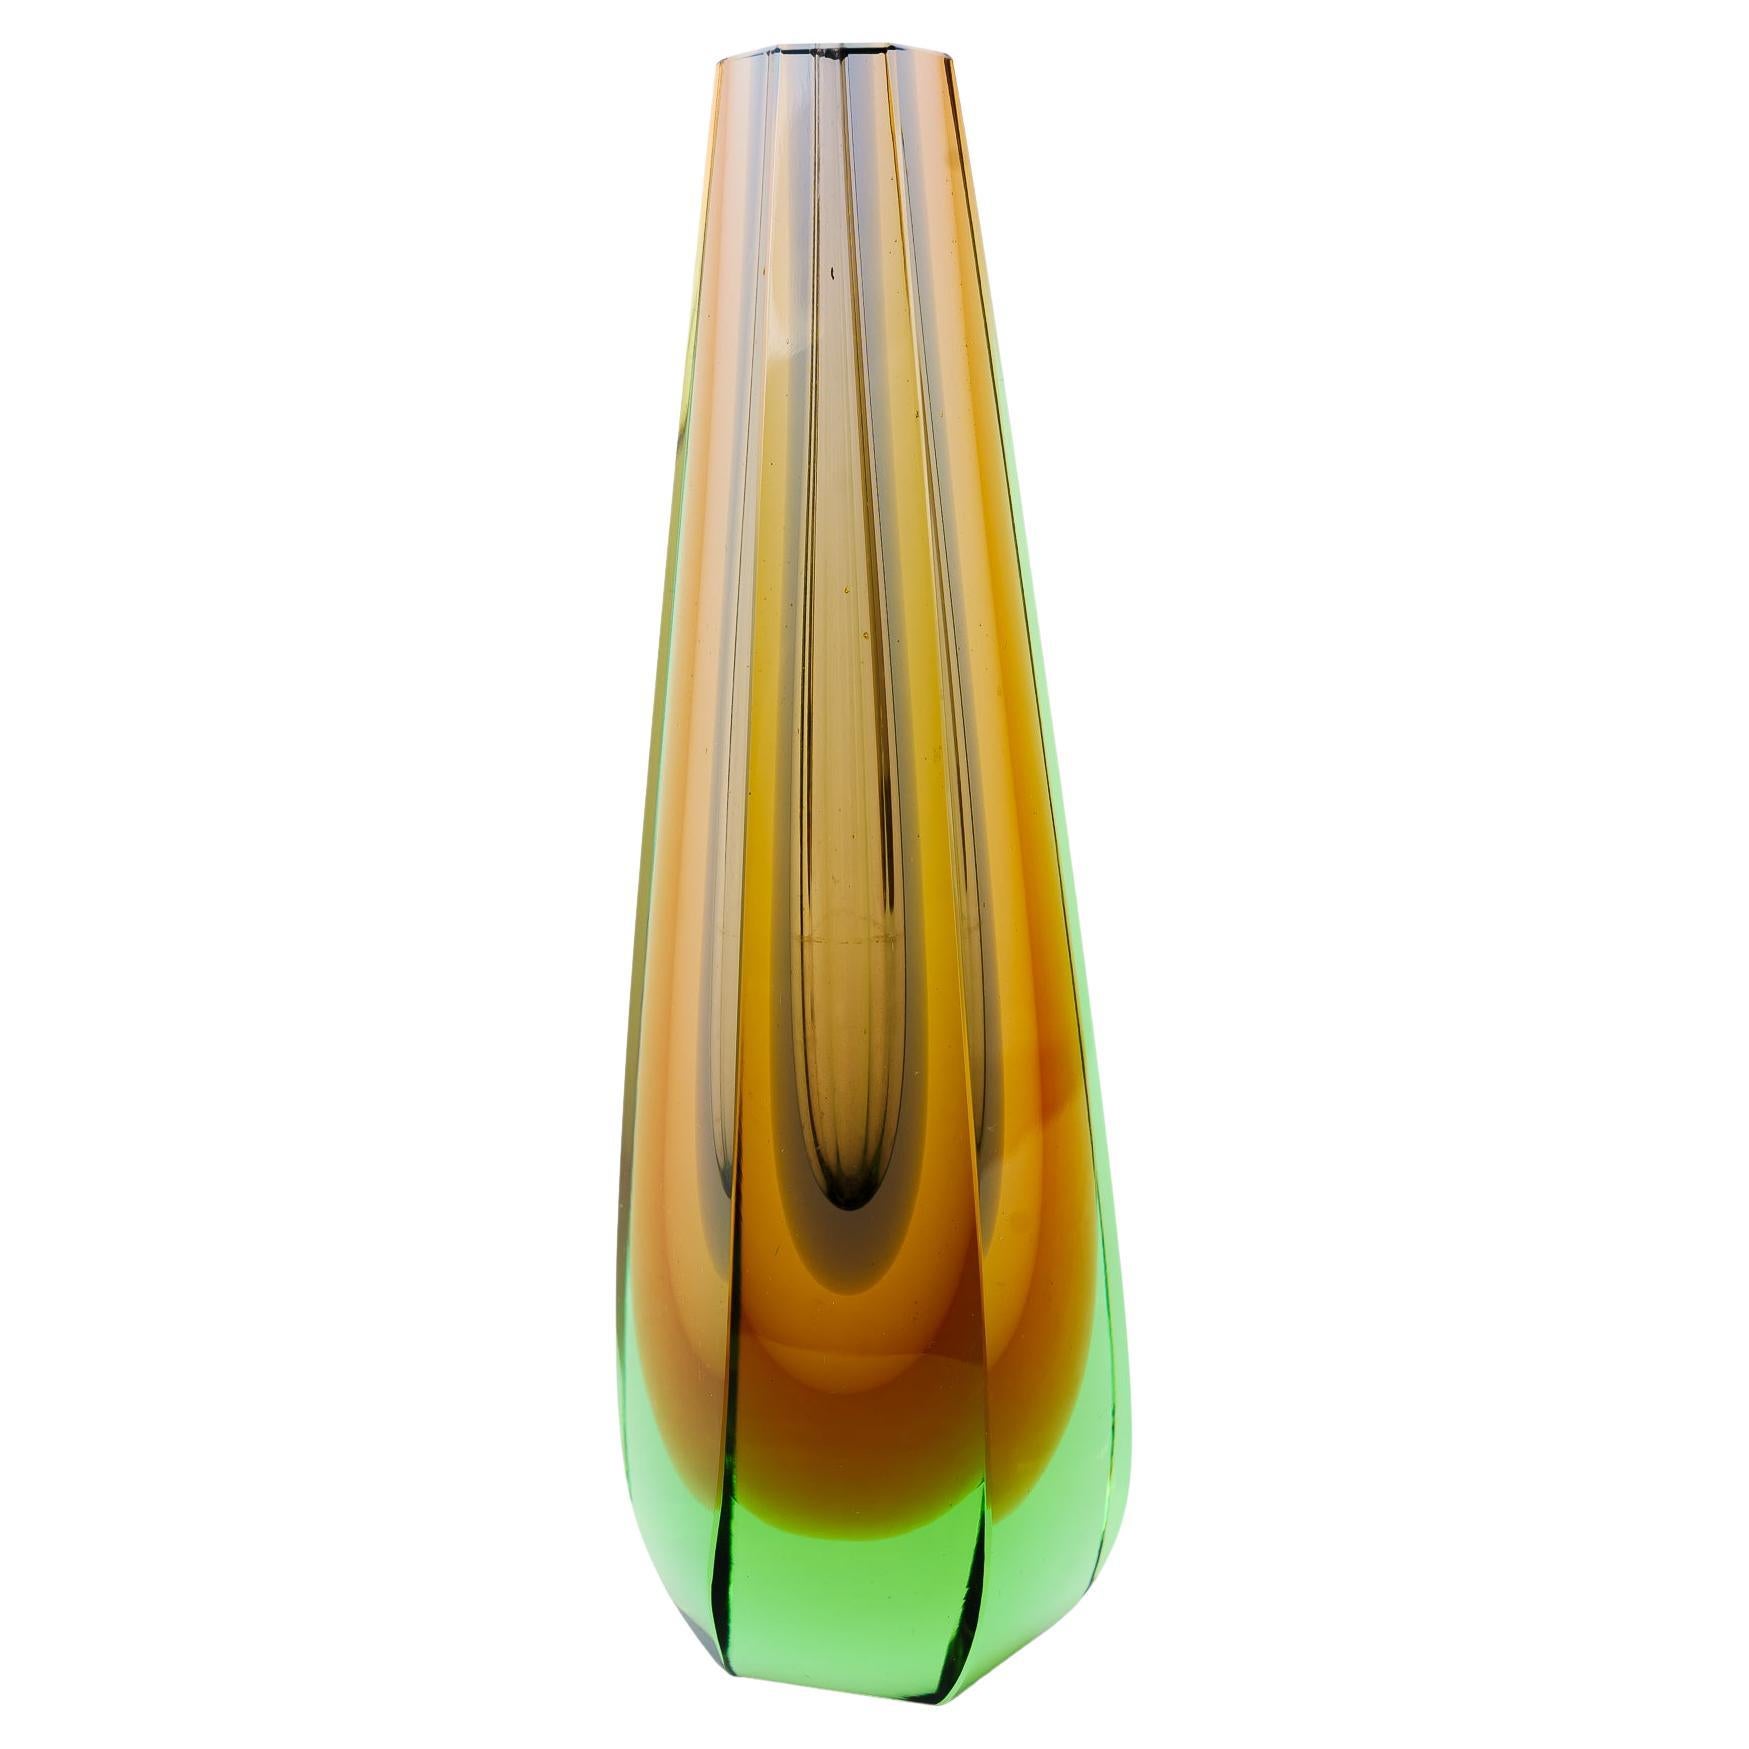 Vase for 1 Flower, Italy 1950s by Murano